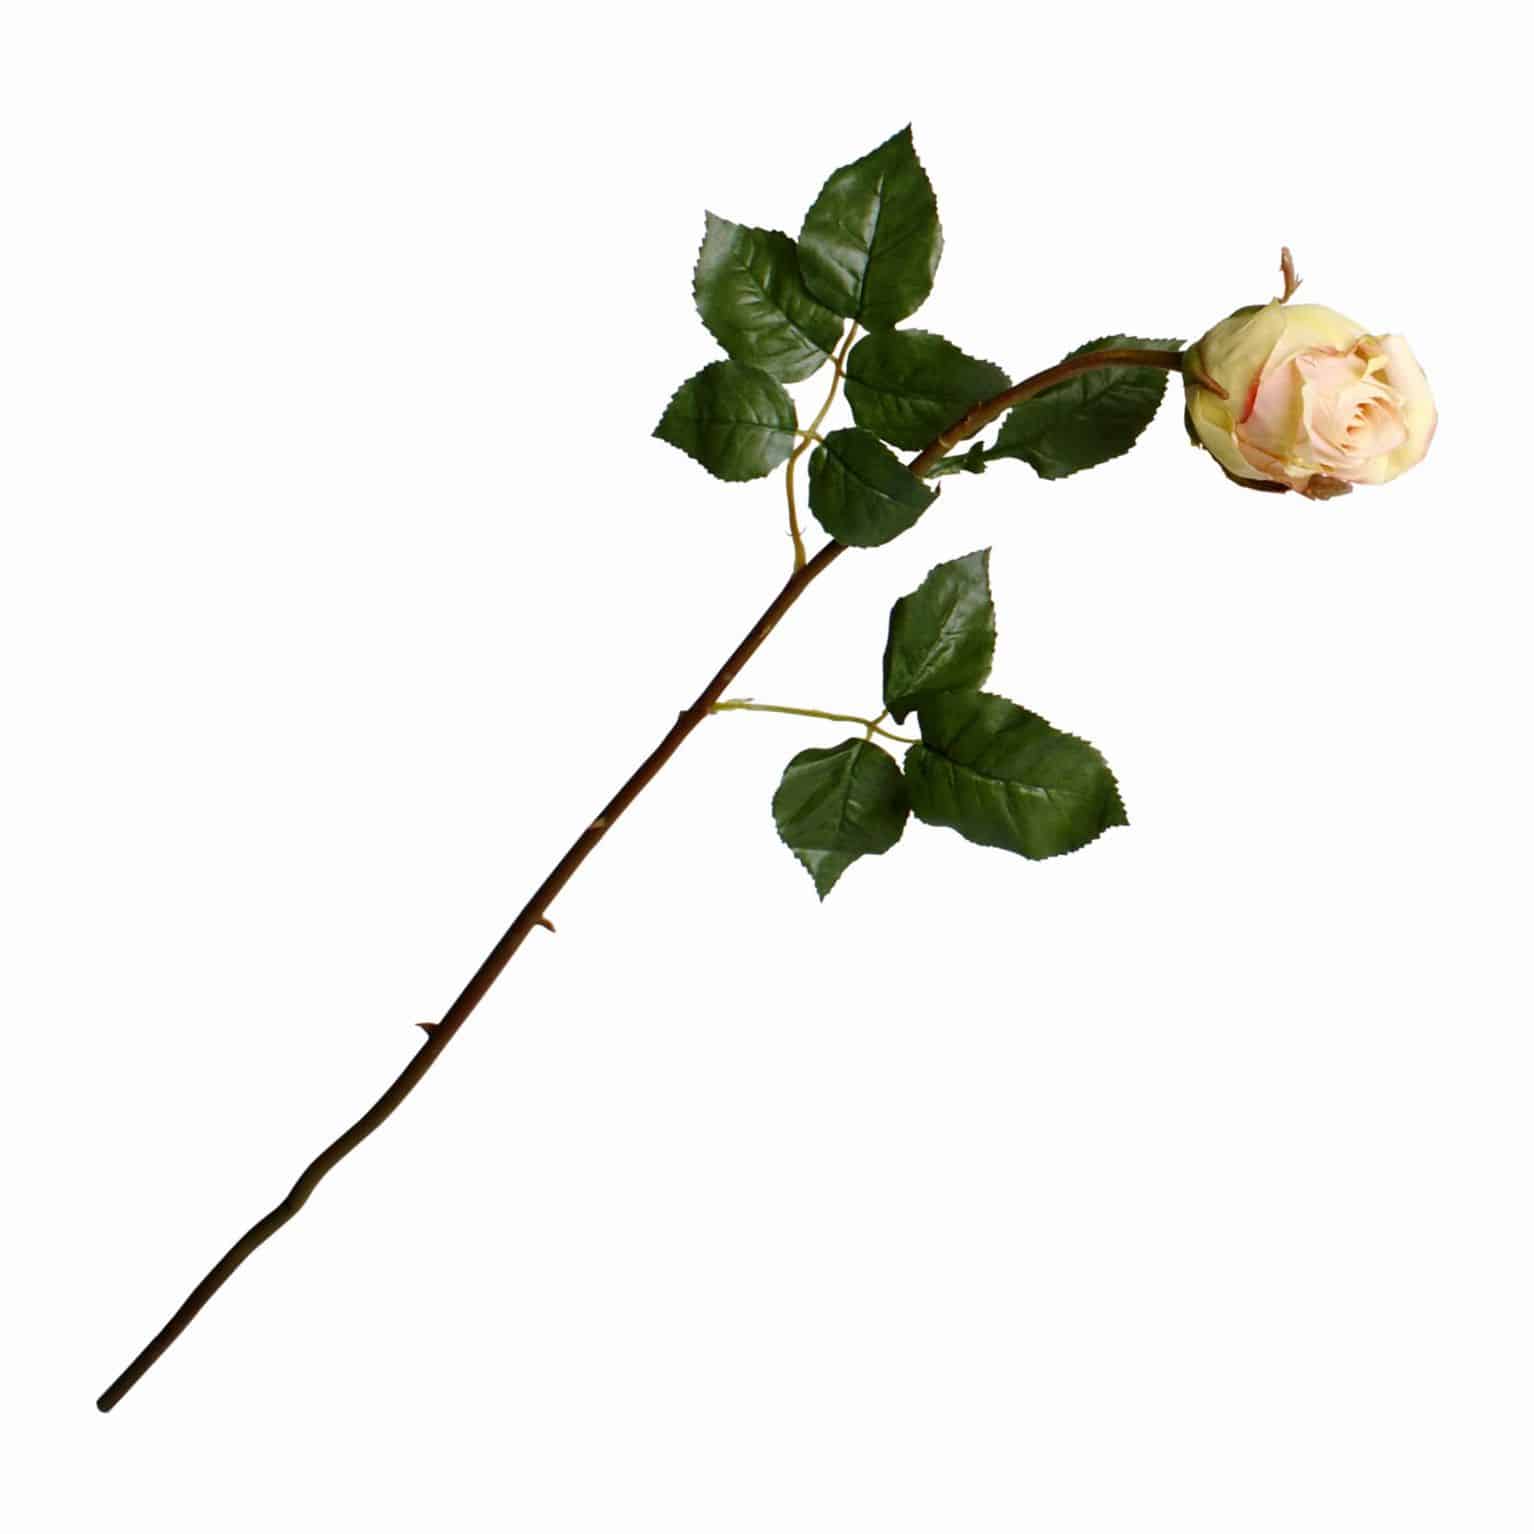 Buy the best silk roses. Our dusty pink Ecuador rose flower is truly natural looking. Each stem has a partially bloomed bud with tight petals and a long stem.